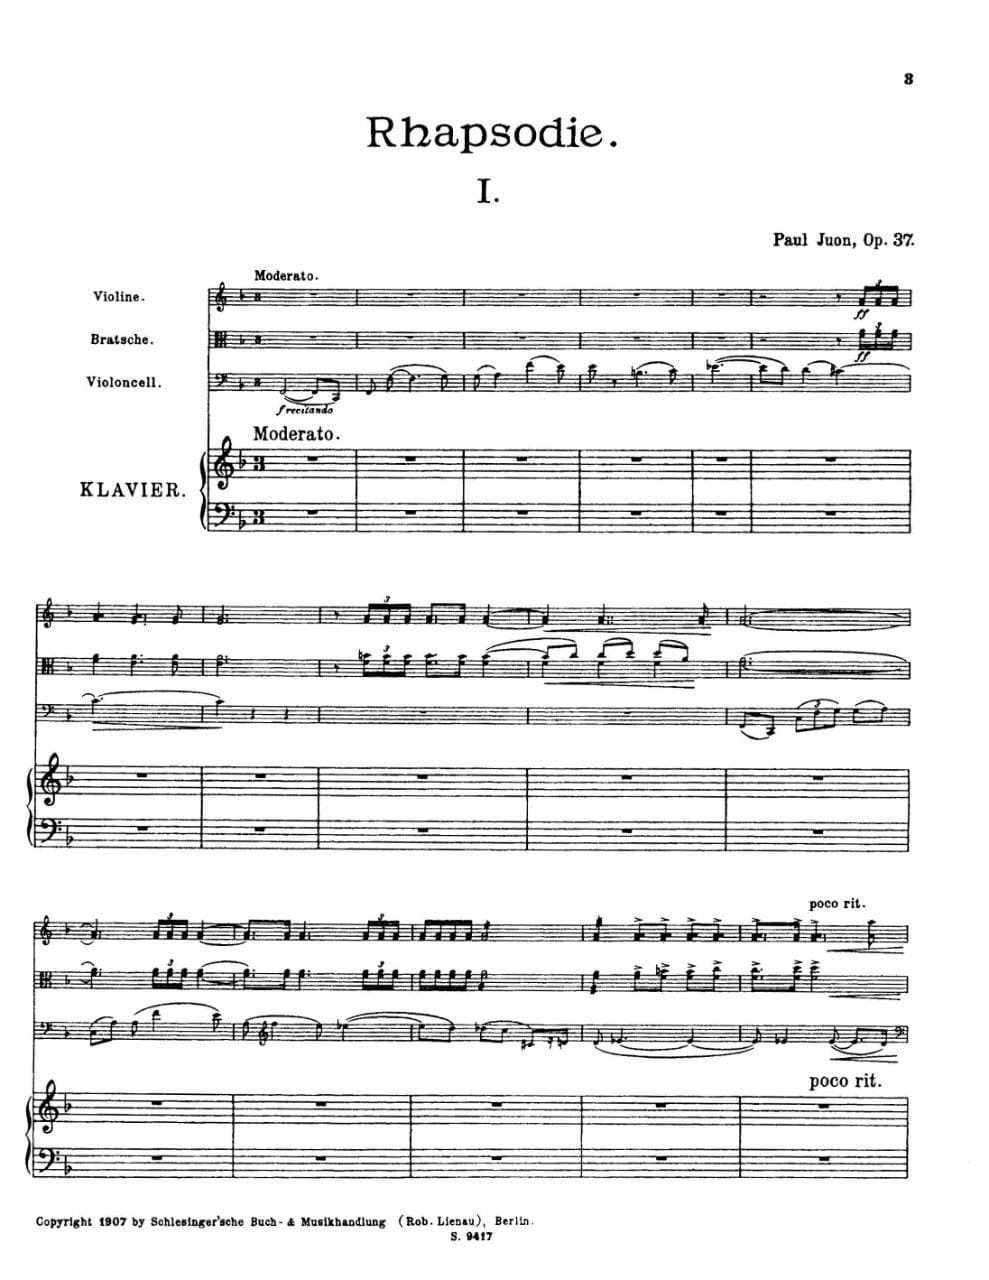 Juon, Paul - Rhapsodie, for Piano Quartet (Violin, Viola, Cello, and Piano) Reprint of the 1907 Schlesinger Edition Published by Lauren Publications